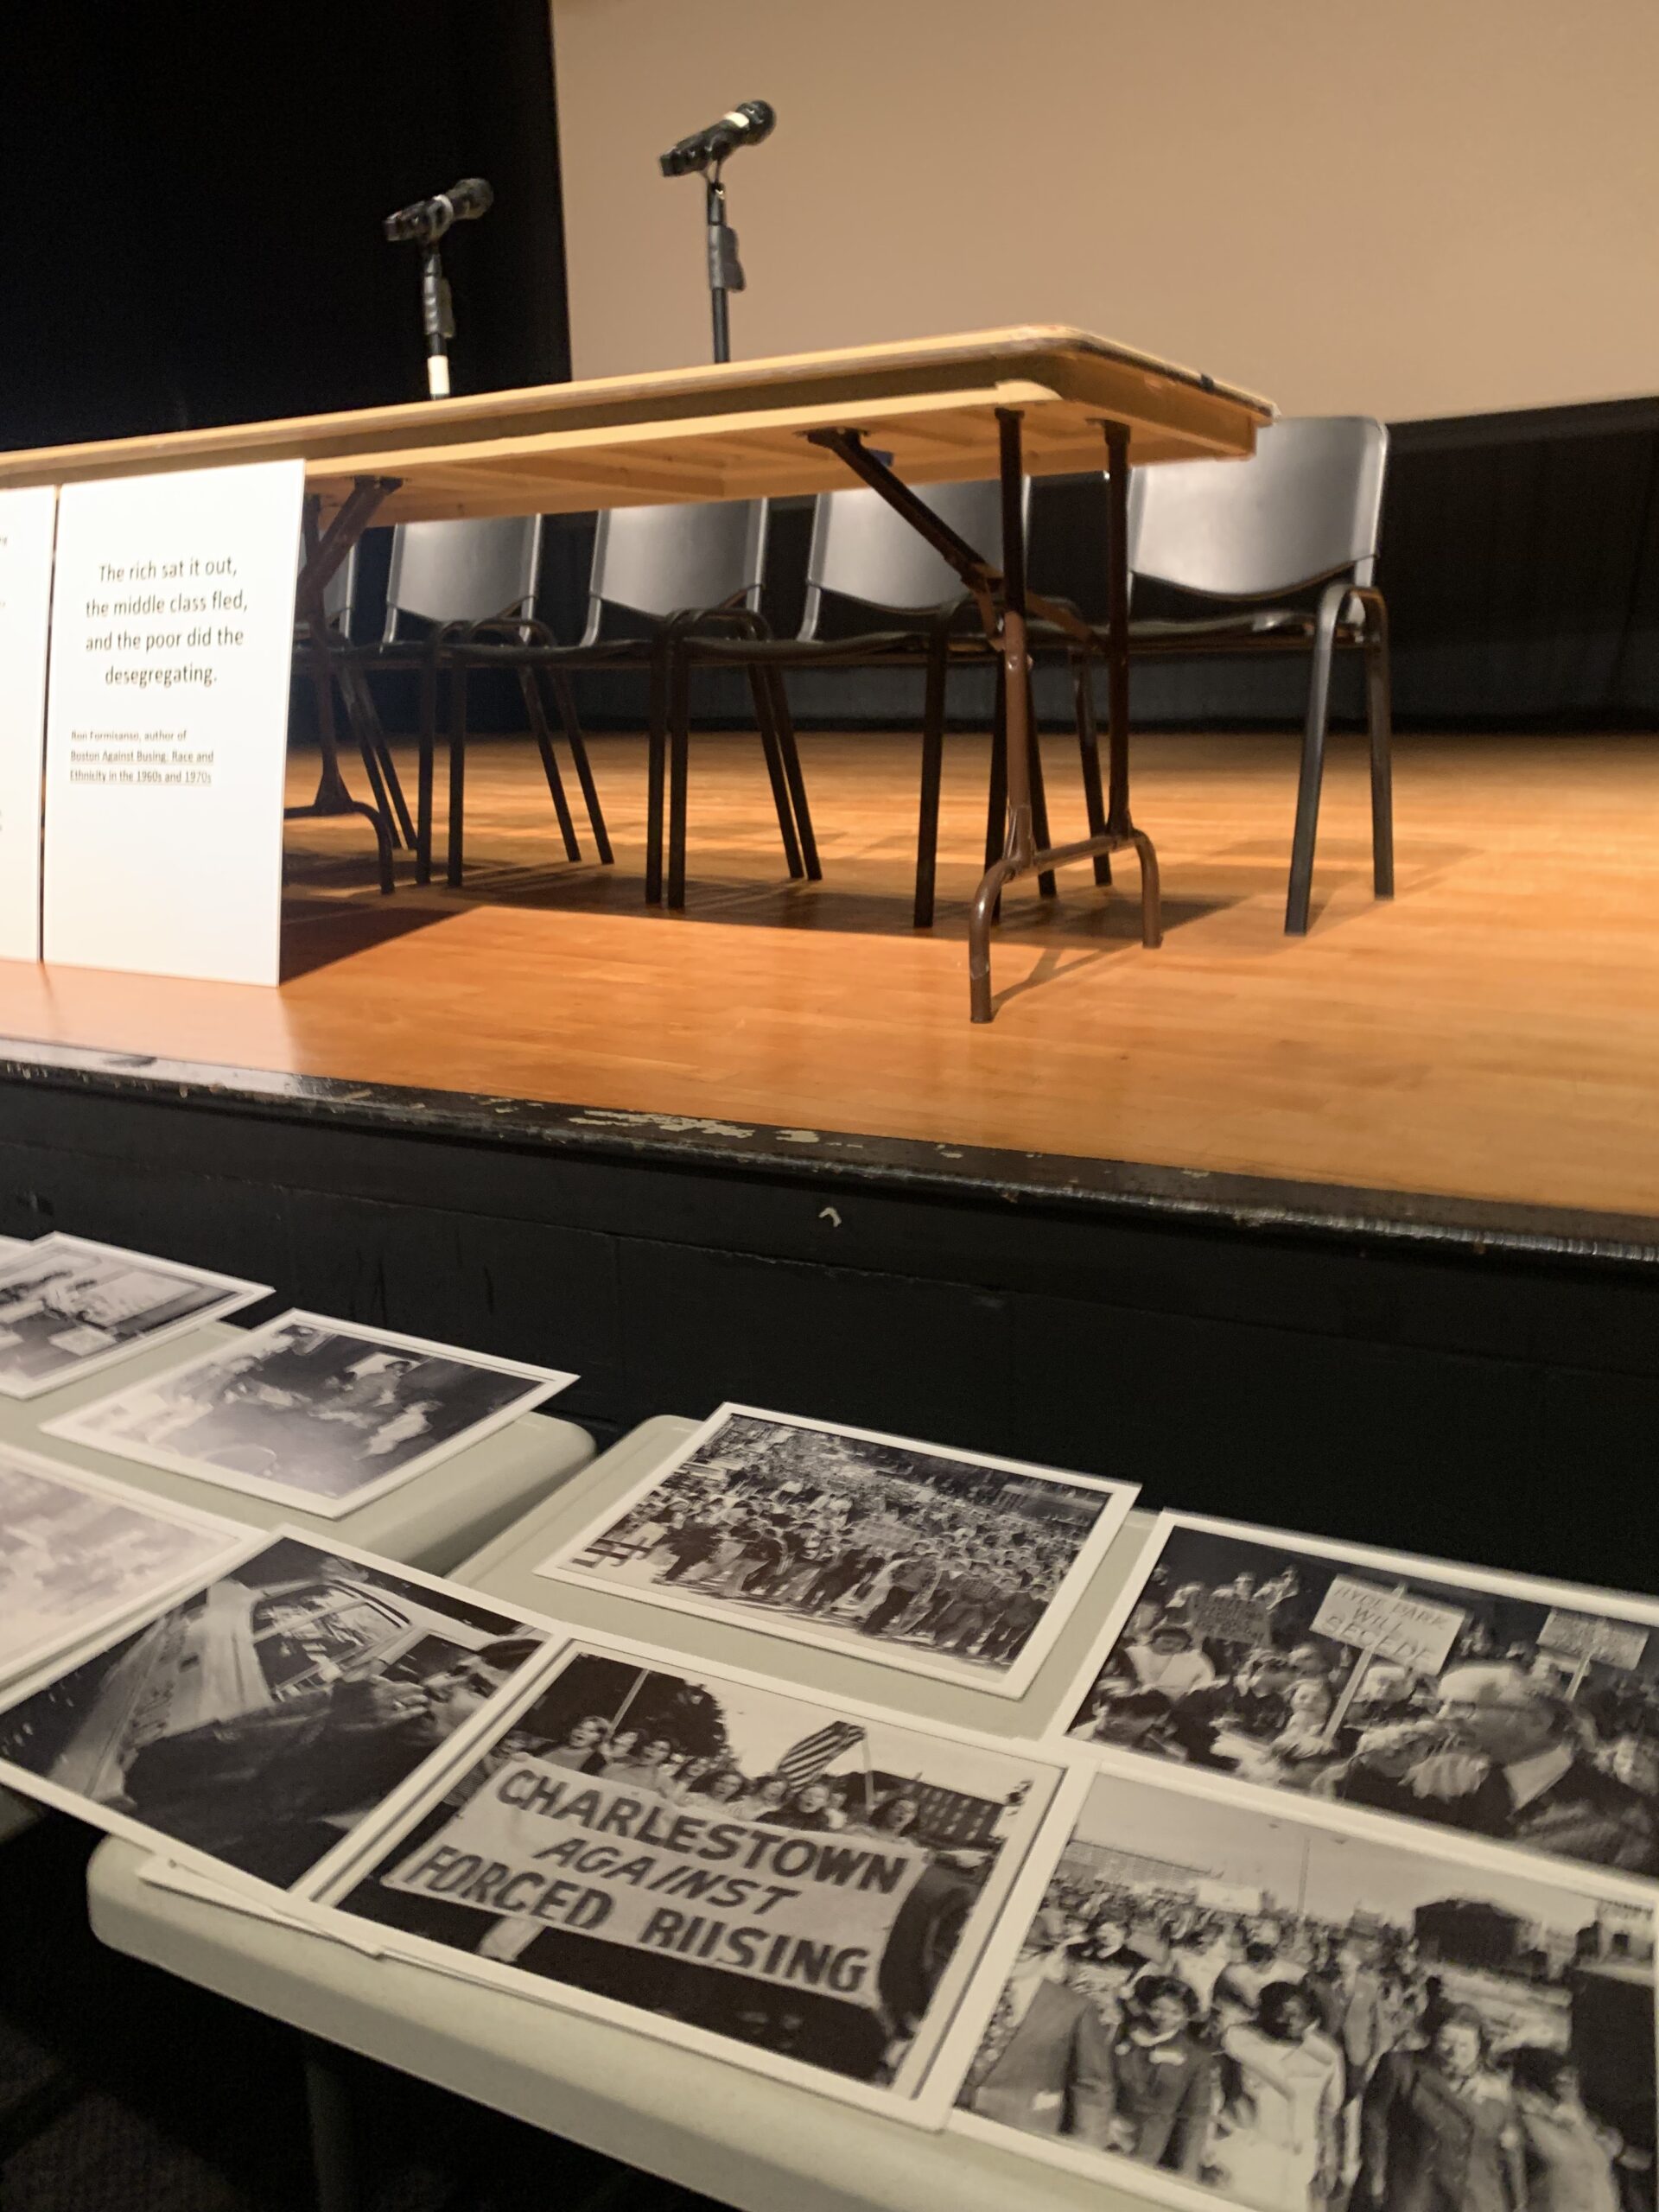 A table covered with archival images and documents in front of a stage set for a forum